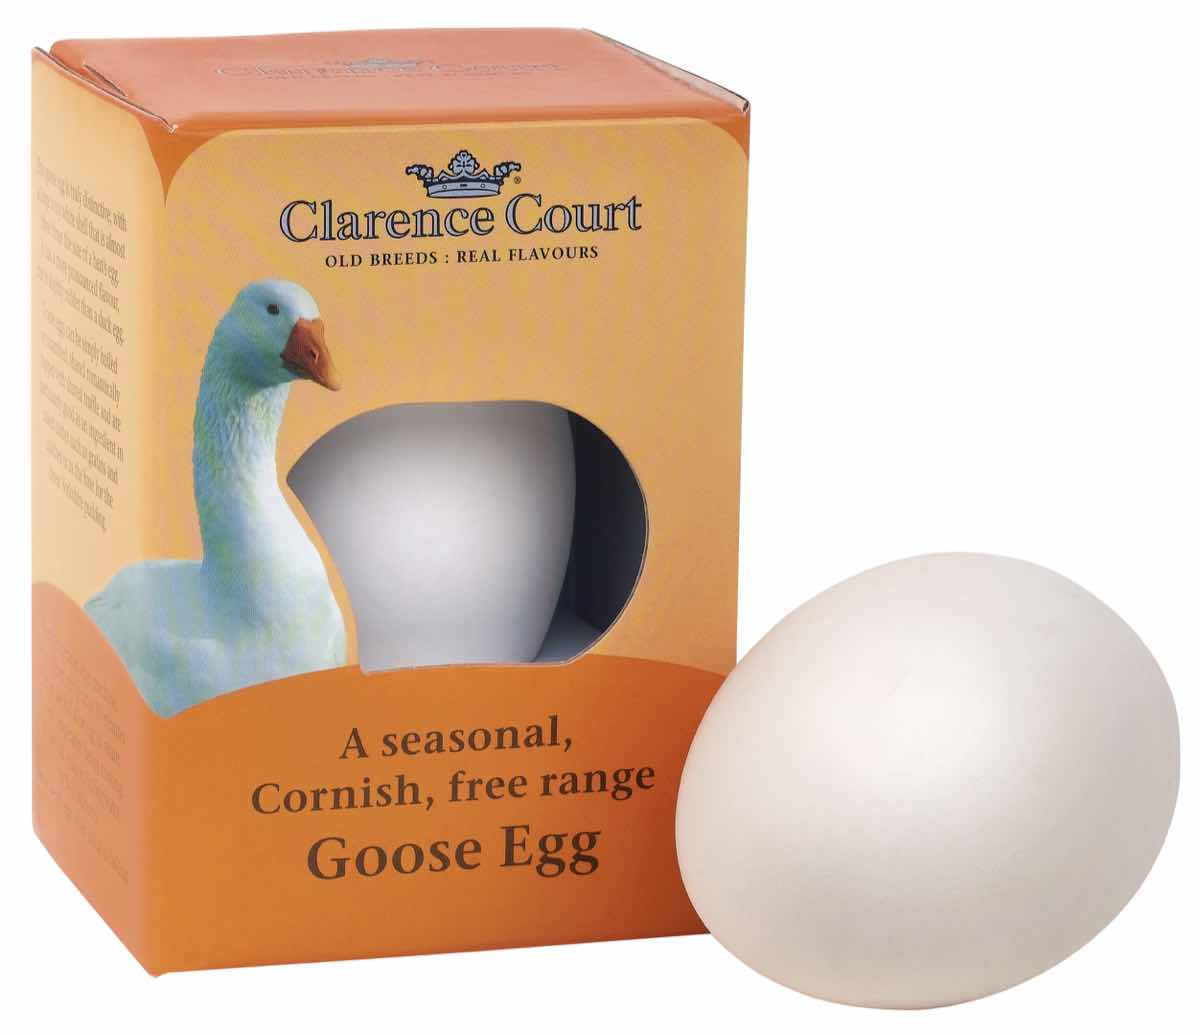 Goose eggs are available for 12 days of Christmas